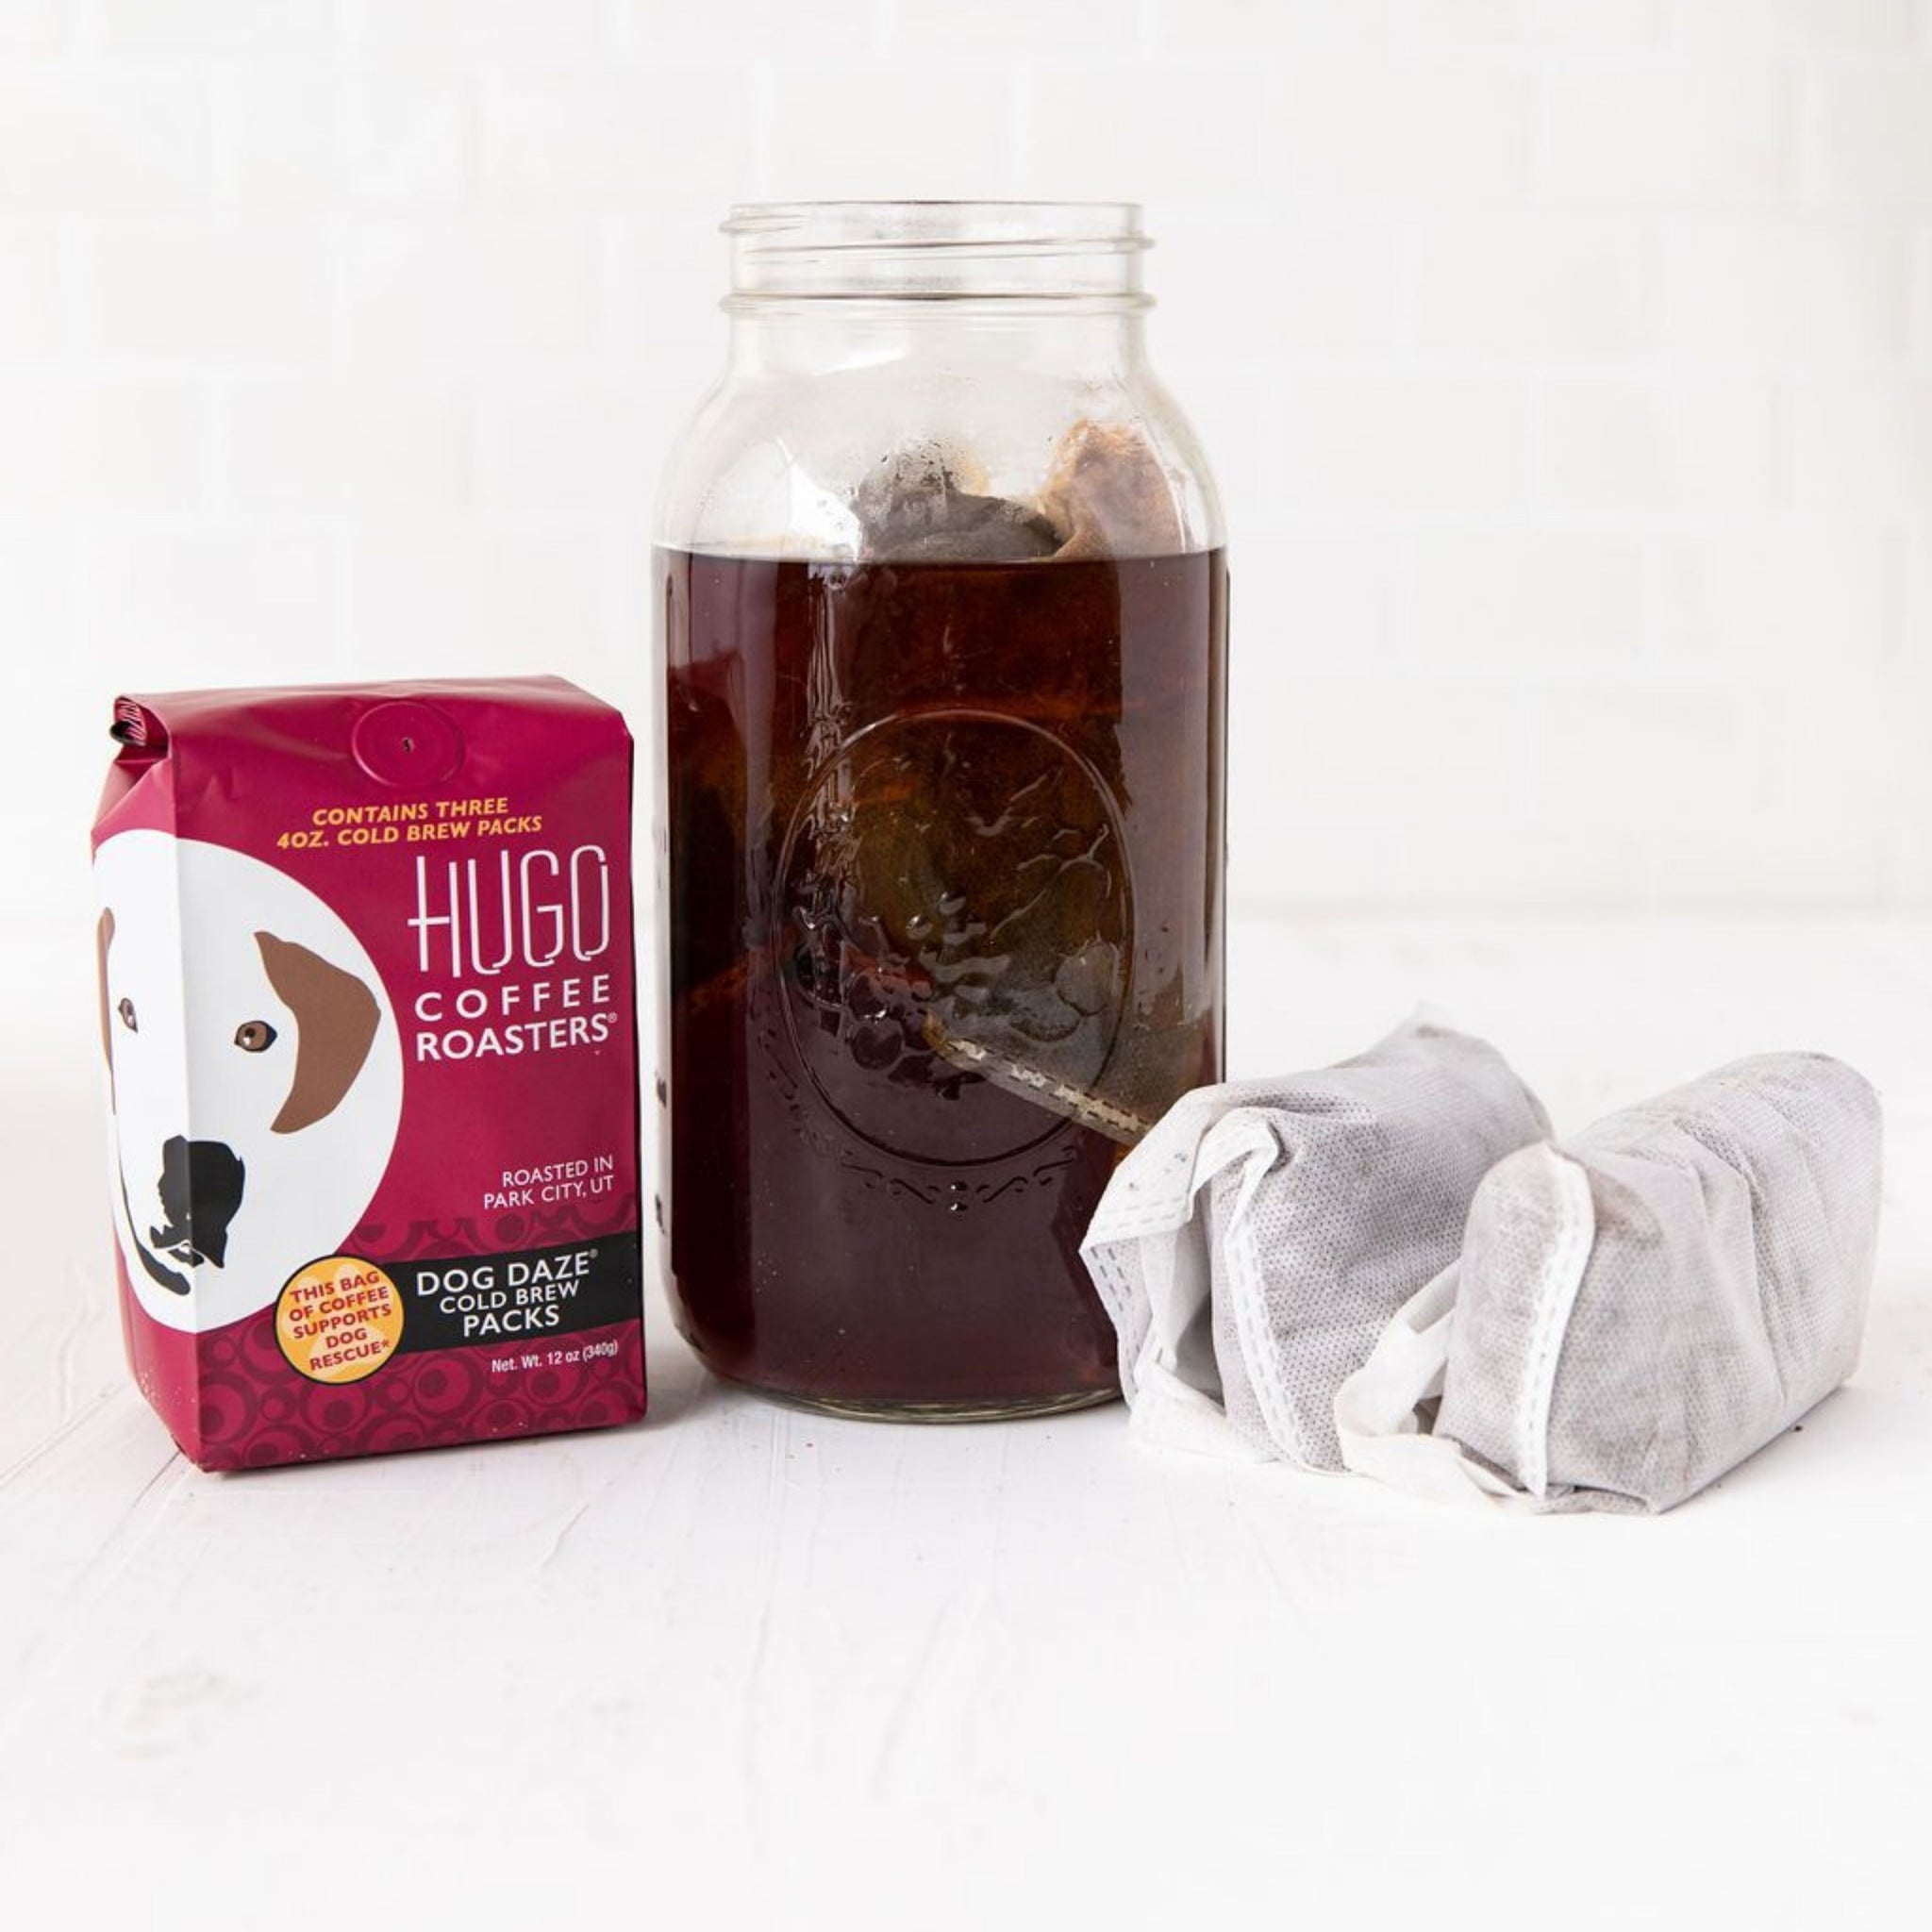 Cold Brew Kit - Greyhouse Coffee